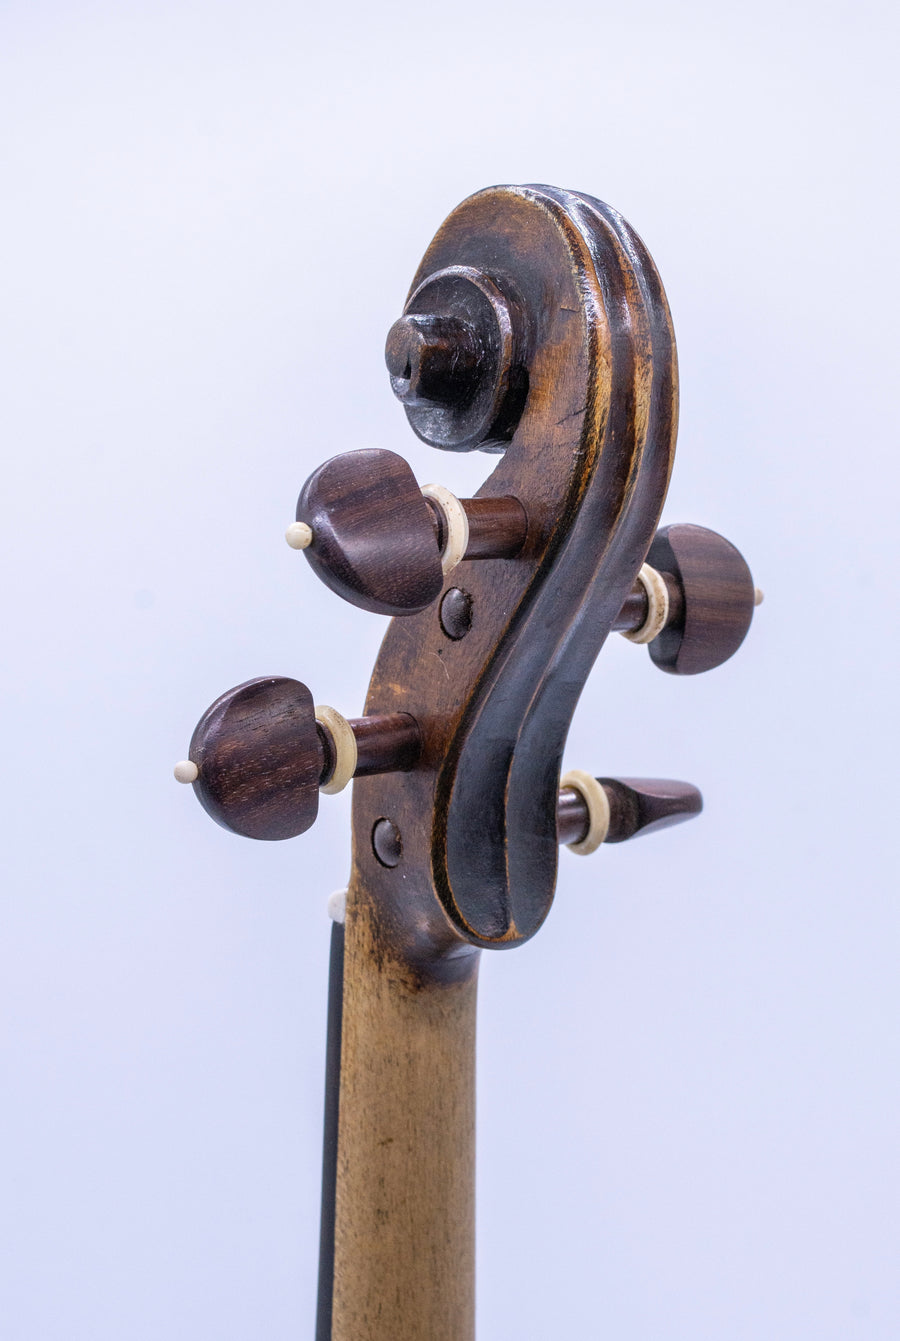 A French Violin from the Caussin Workshop in Neufchâteau, 1870-1880